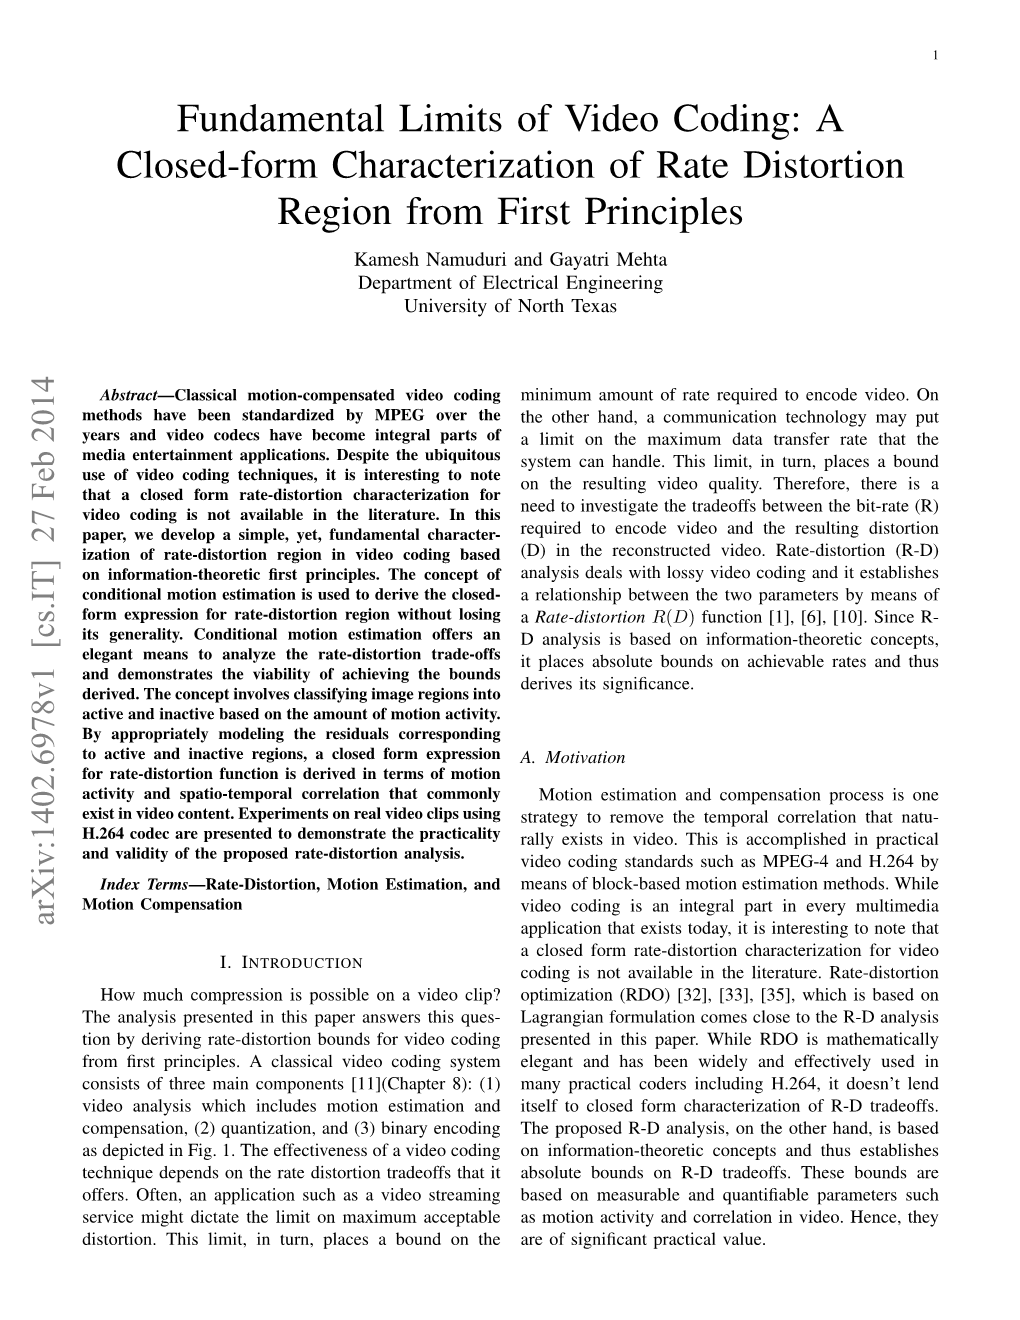 Fundamental Limits of Video Coding: a Closed-Form Characterization of Rate Distortion Region from First Principles